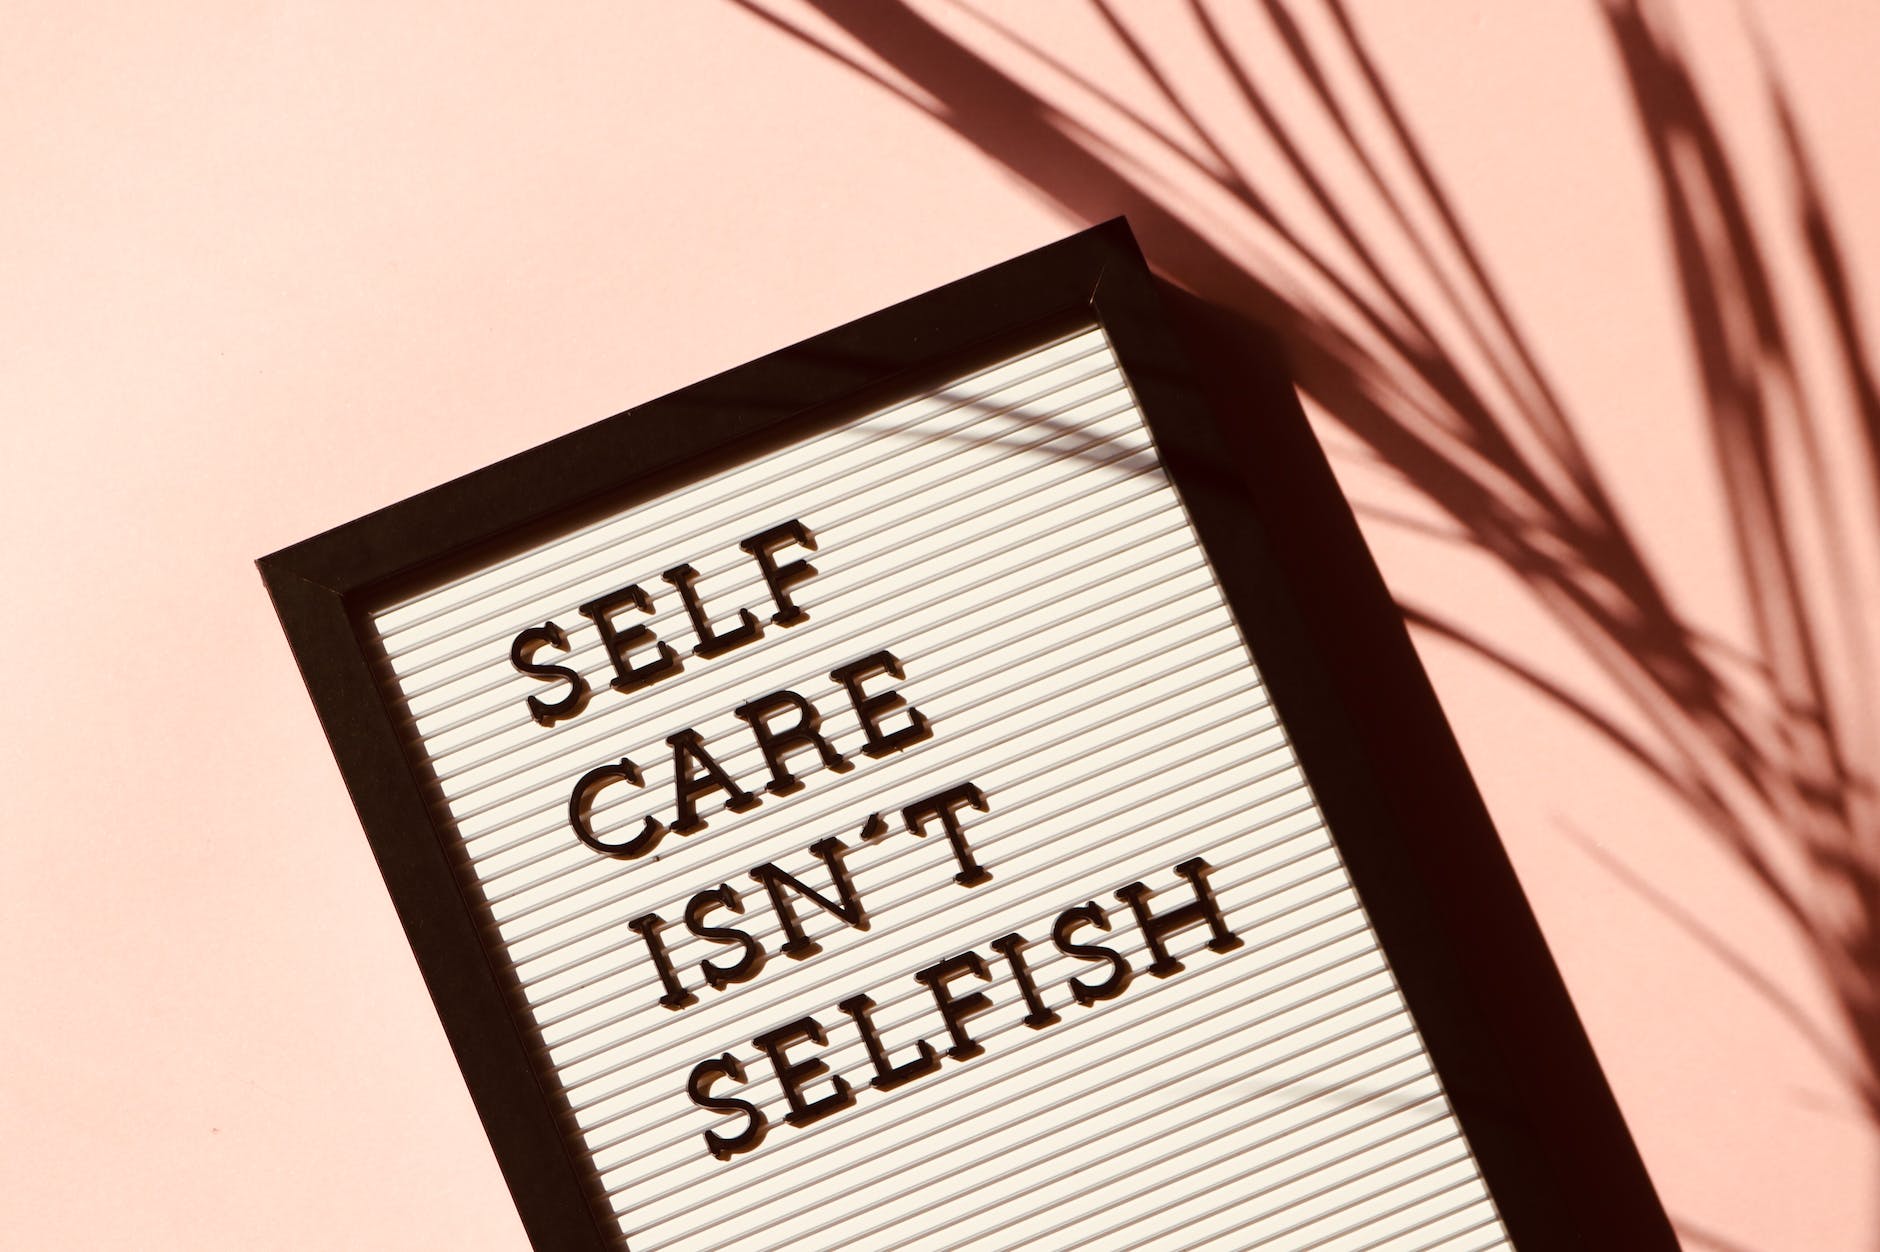 Complete selfcare checklist and wellbeing ideas for exhausted warriors